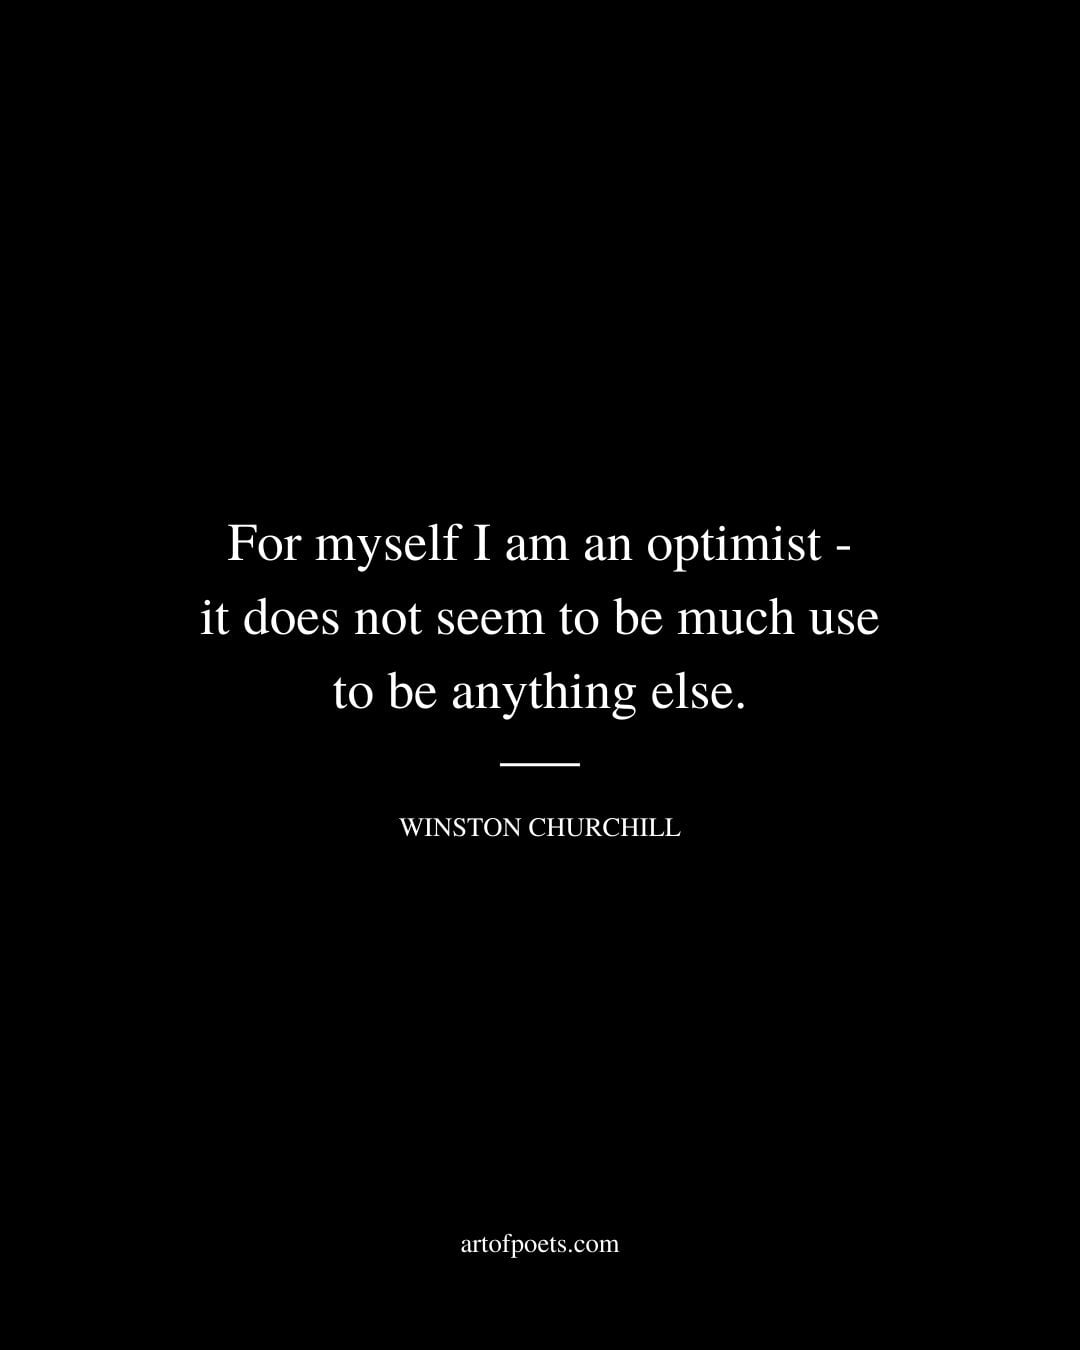 For myself I am an optimist it does not seem to be much use to be anything else